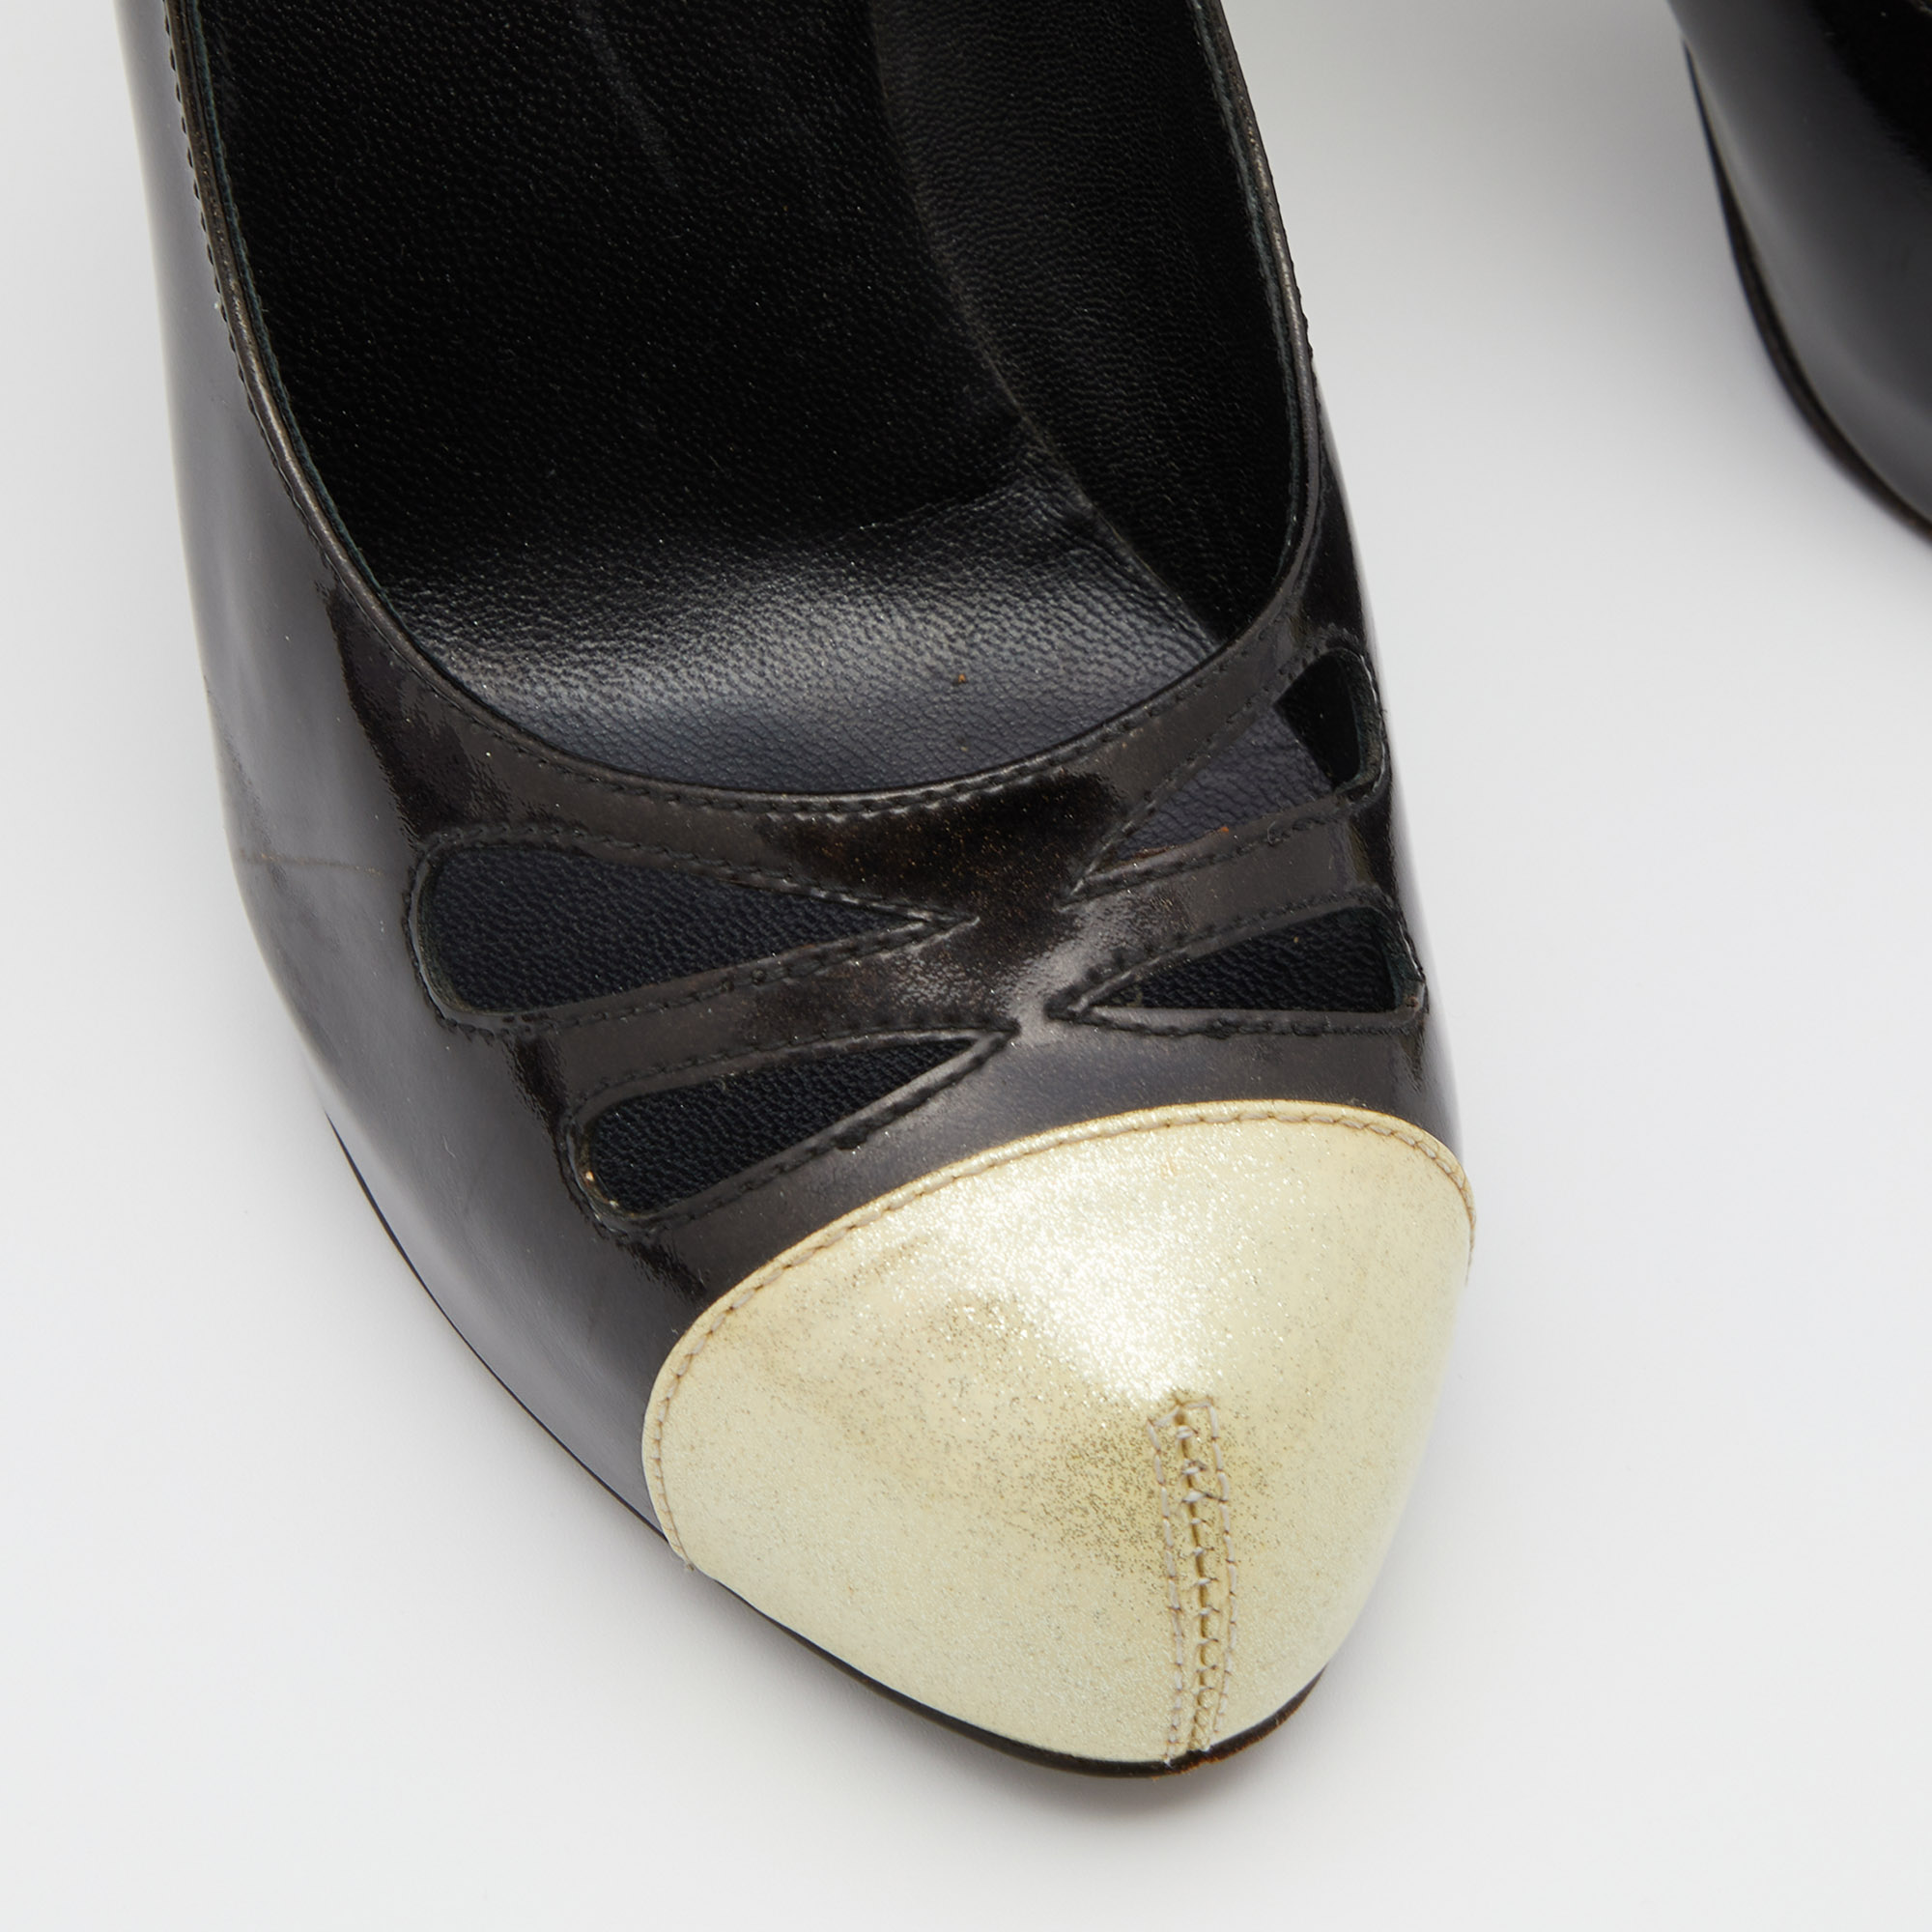 Chanel Black/Gold Patent And Leather CC Cap Toe Pumps 37.5